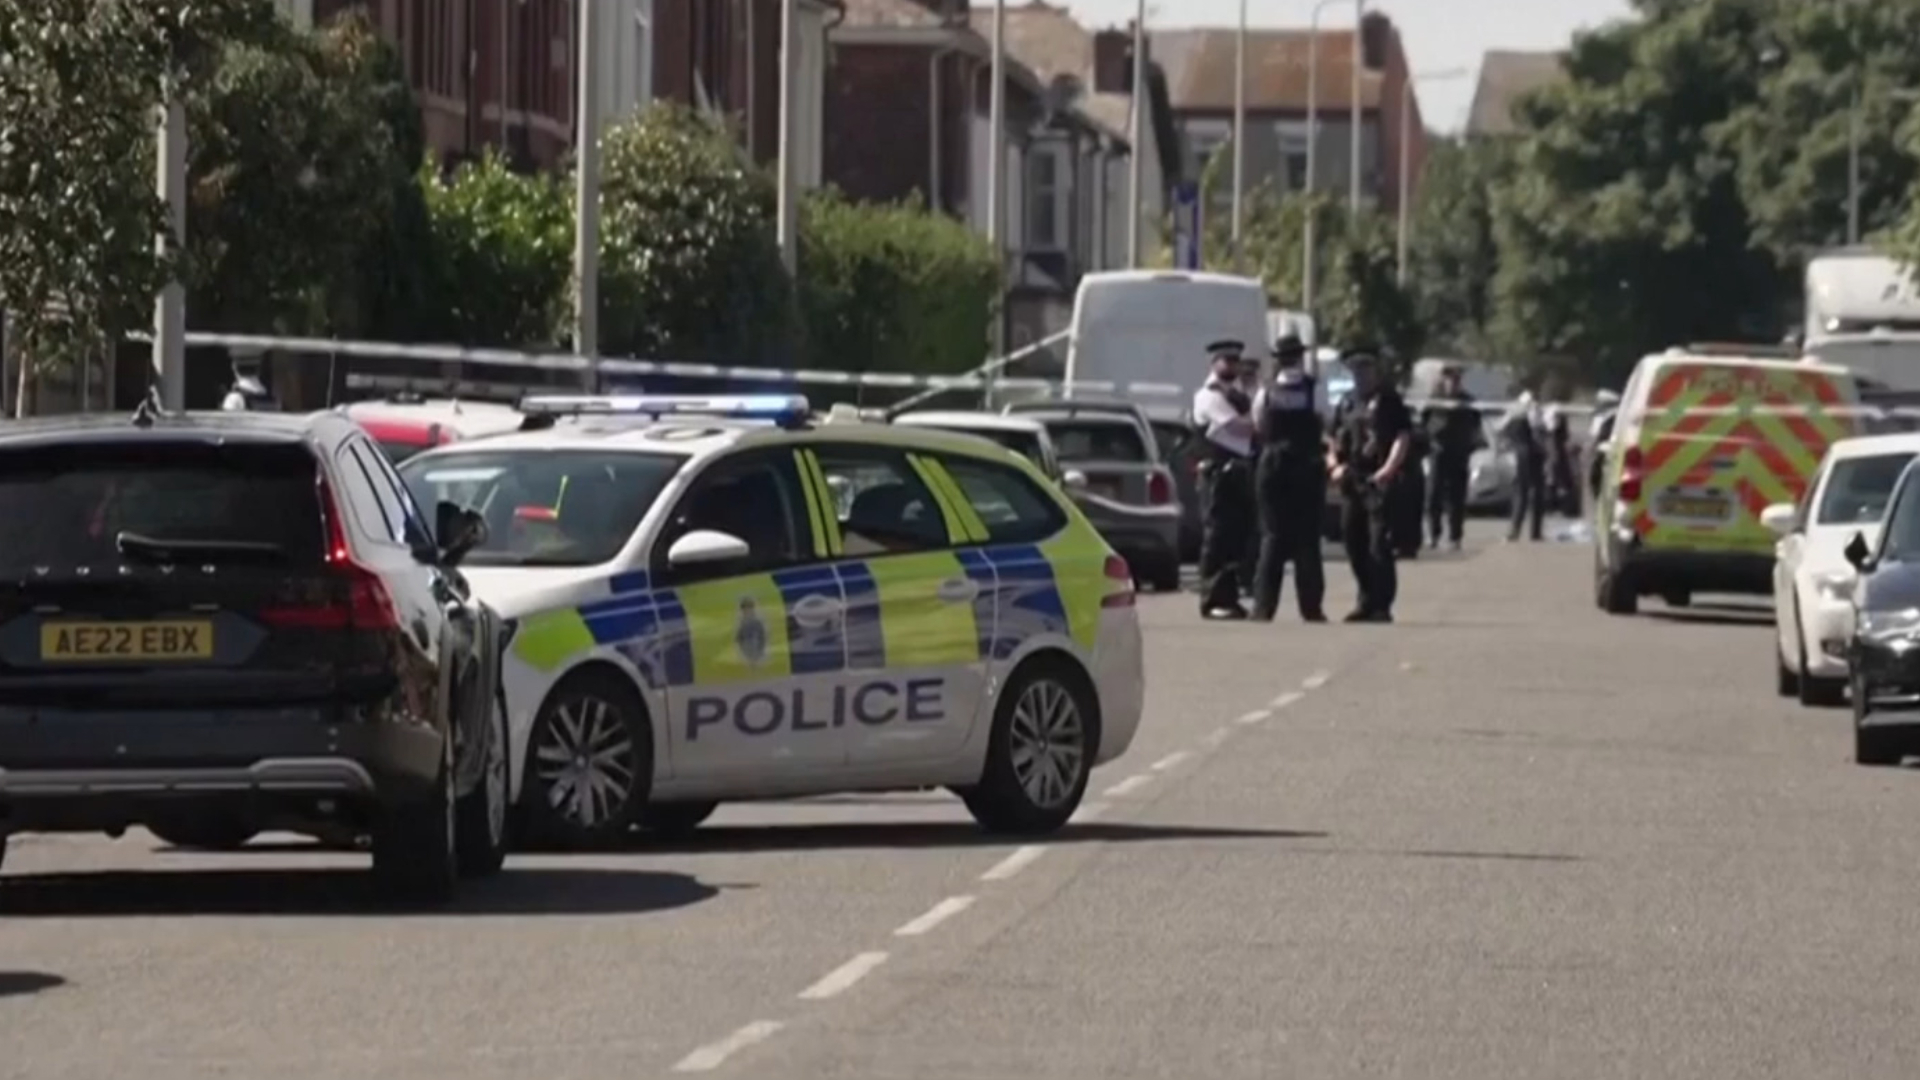 2 children killed, 9 more injured in north-west England knife attack